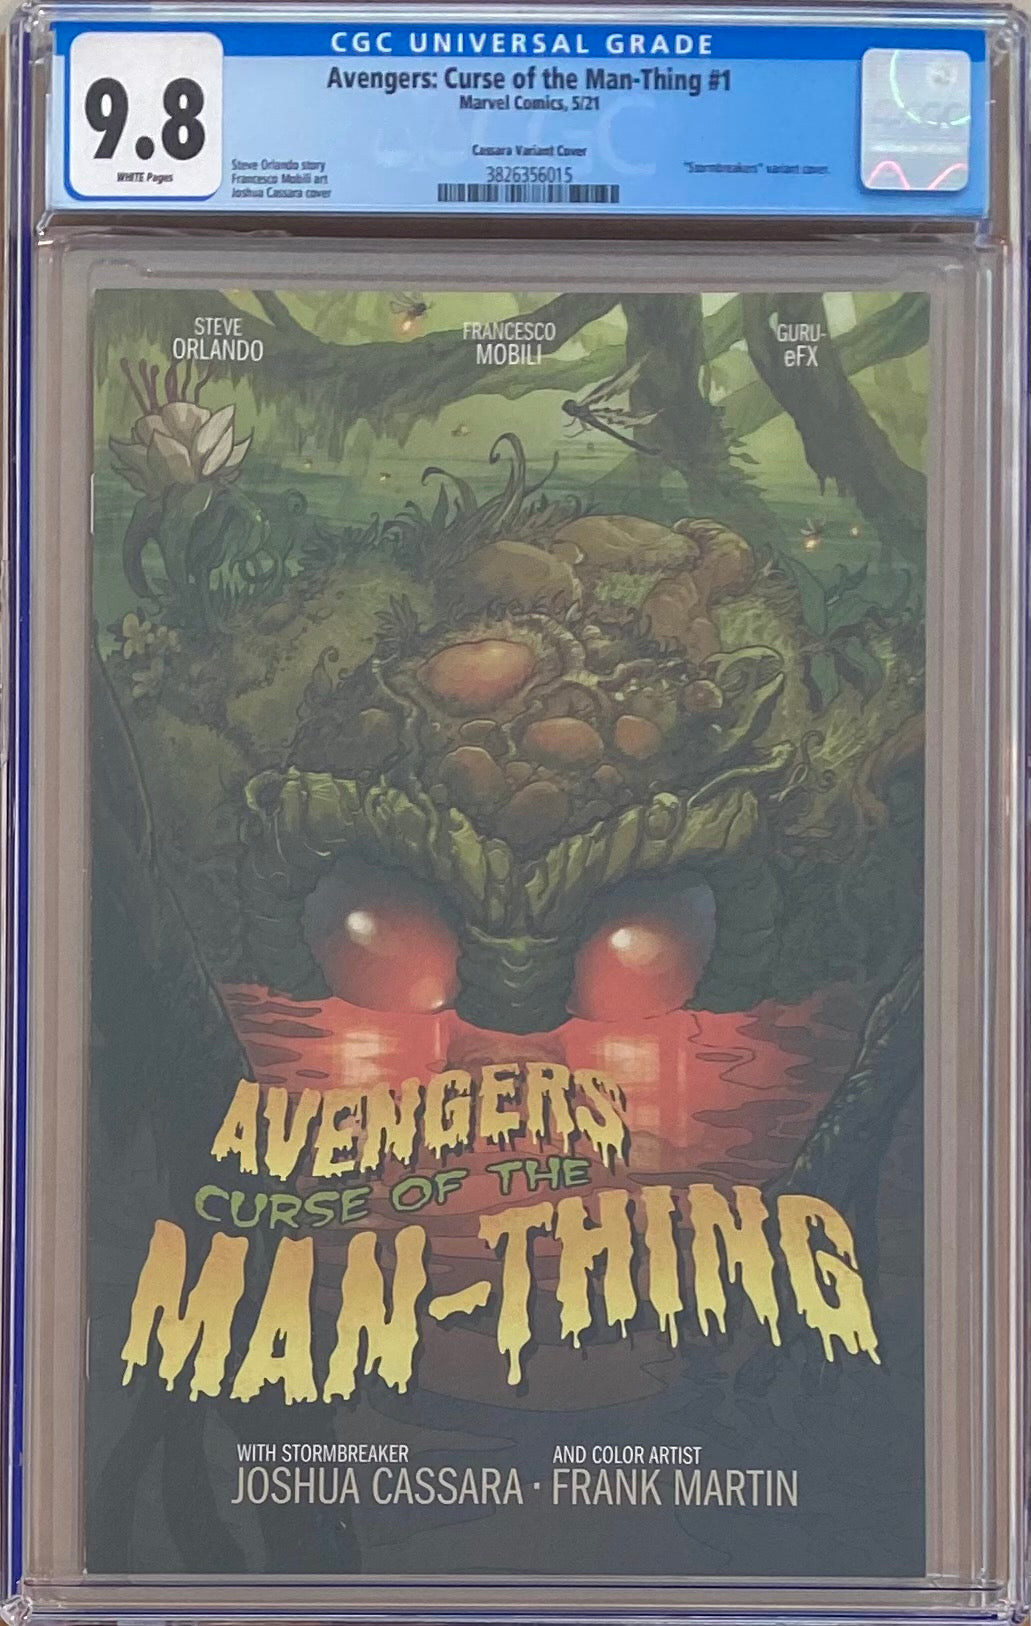 Avengers: Curse of the Man-Thing #1 Cassara "Stormbreakers" Variant CGC 9.8